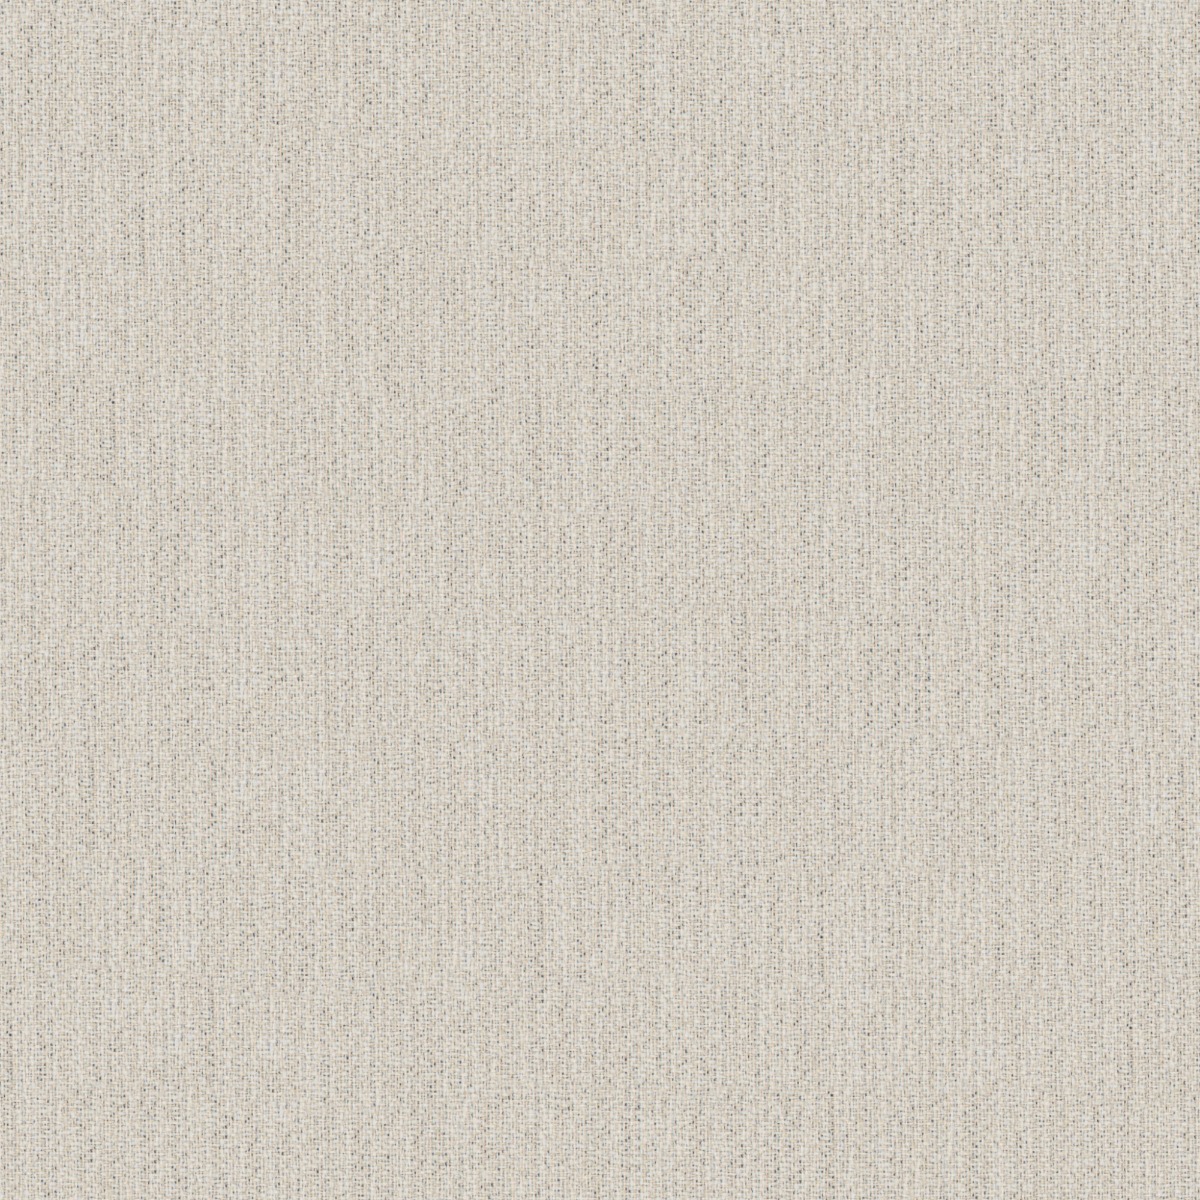 A seamless fabric texture with plain white dimout units arranged in a None pattern